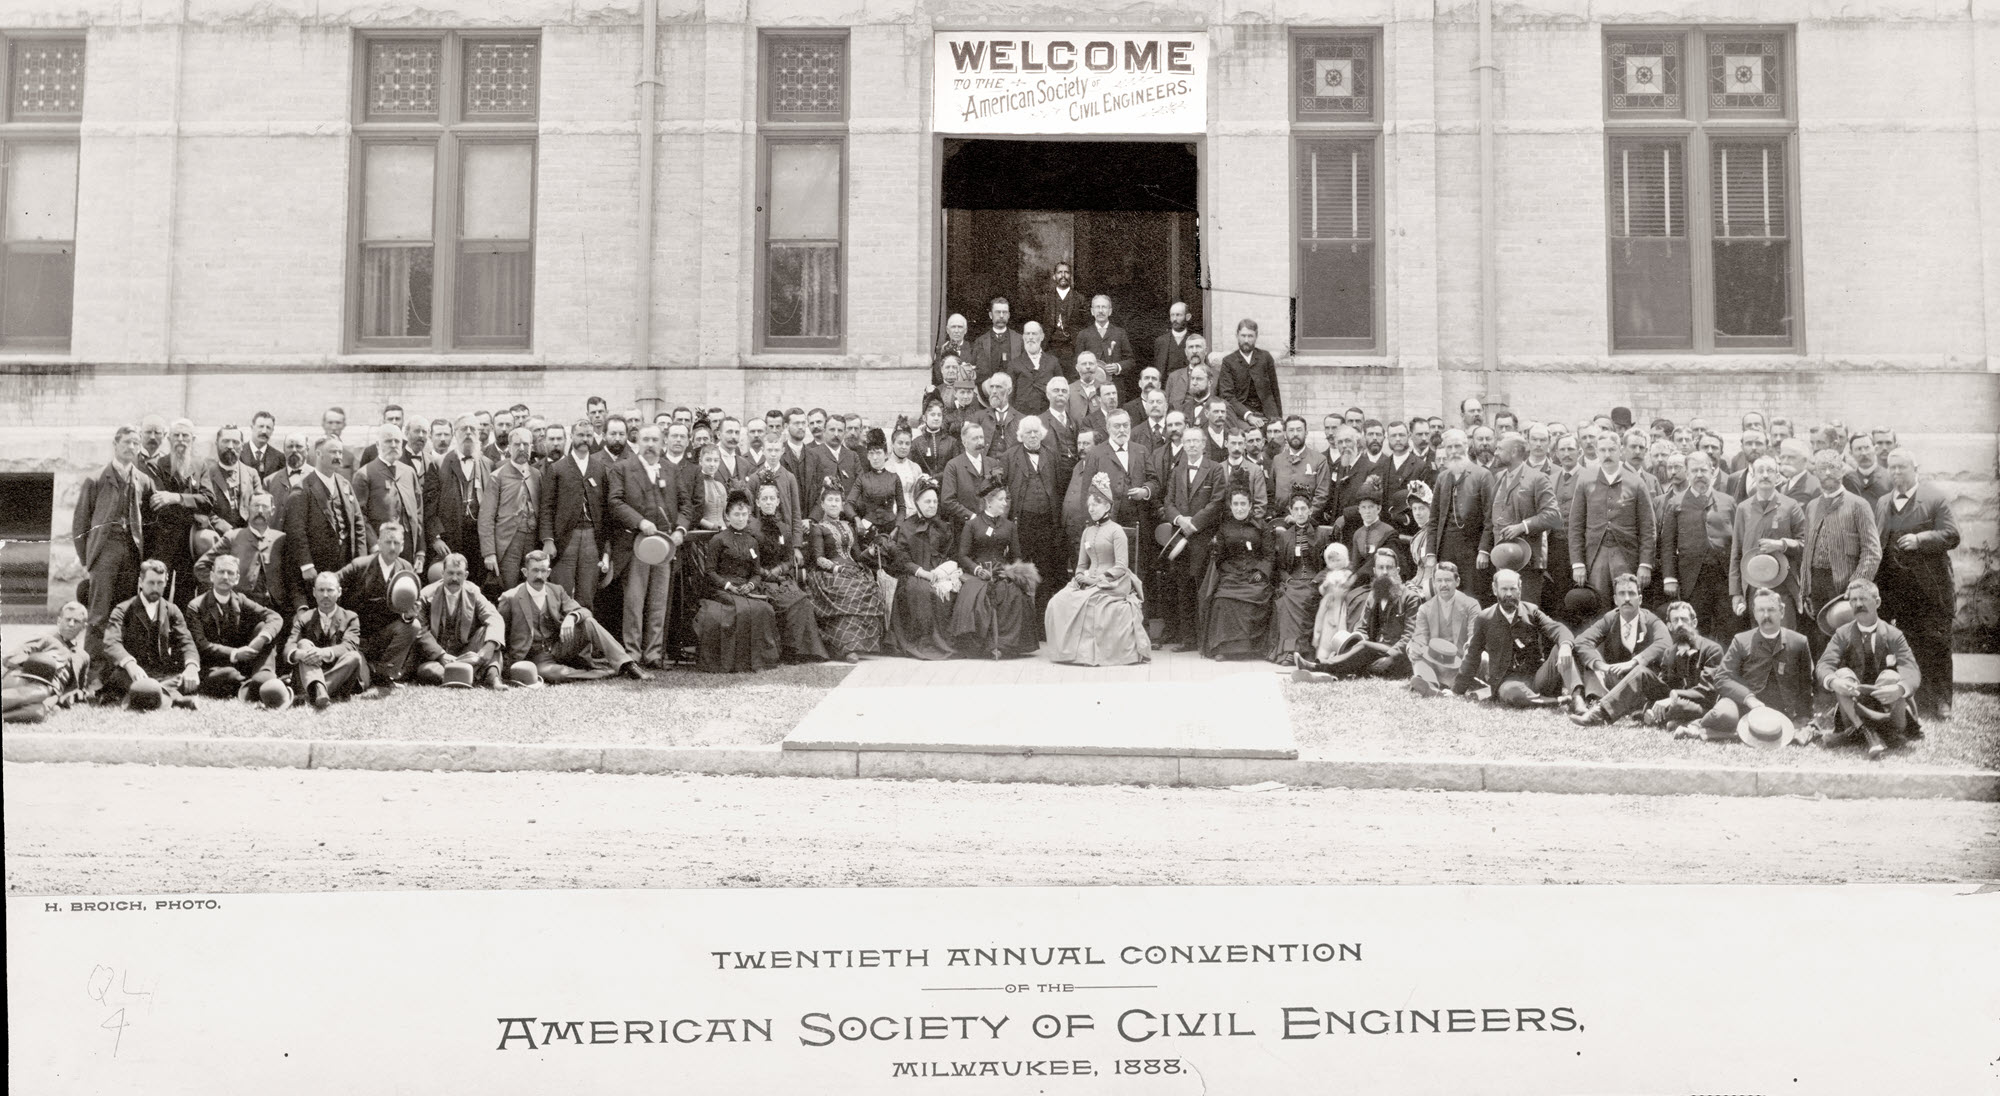 Historic photograph tells stories of ASCE past